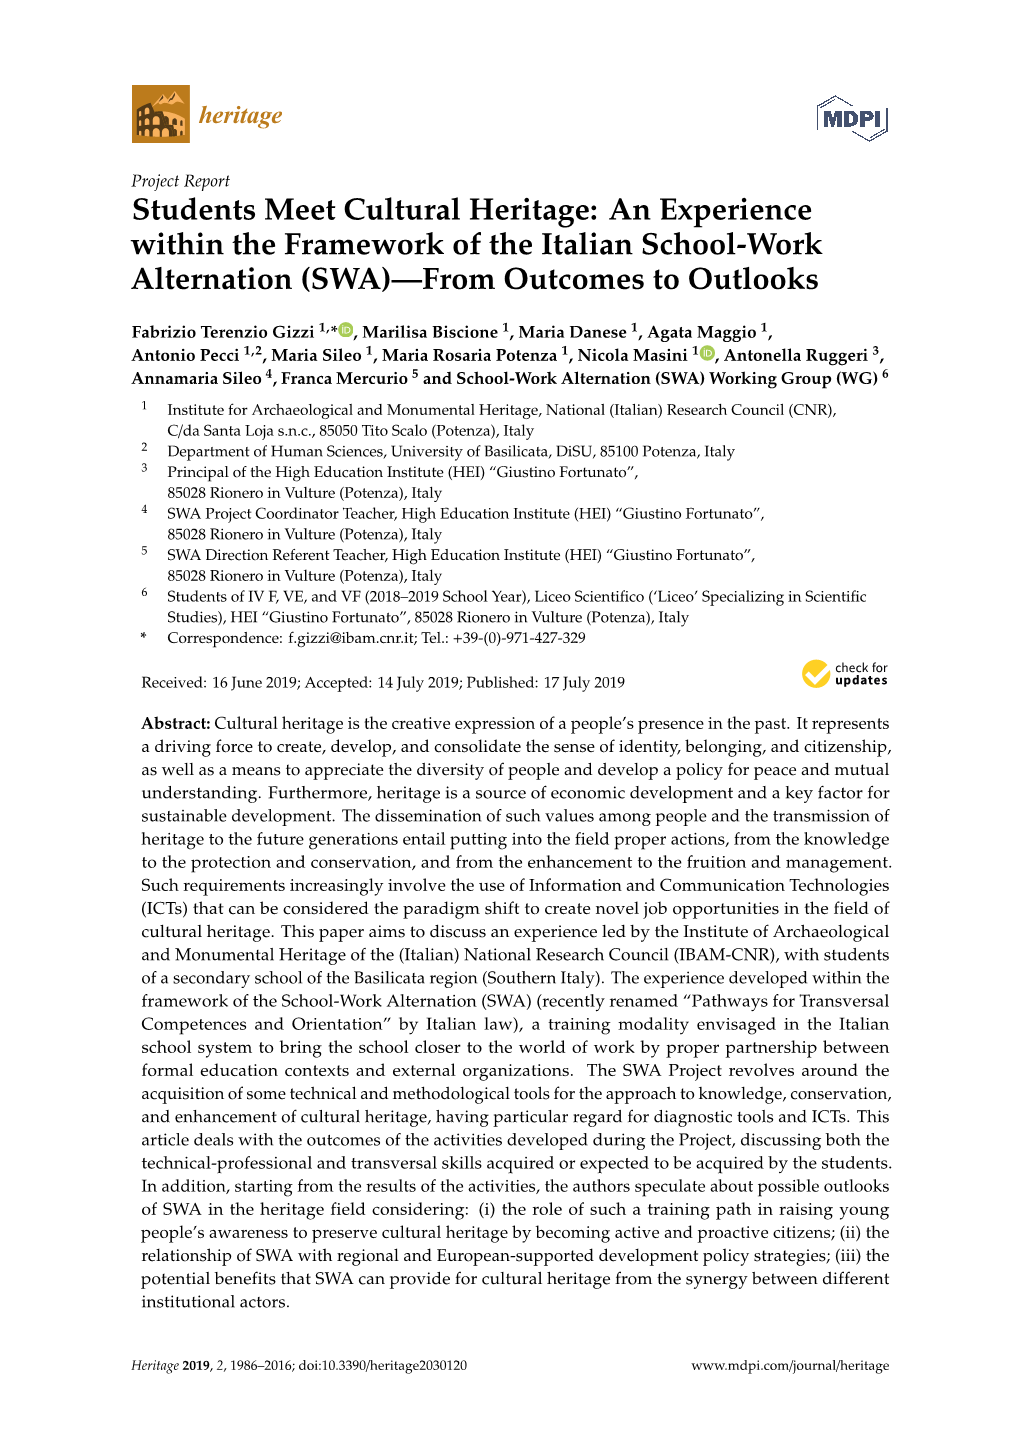 Students Meet Cultural Heritage: an Experience Within the Framework of the Italian School-Work Alternation (SWA)—From Outcomes to Outlooks